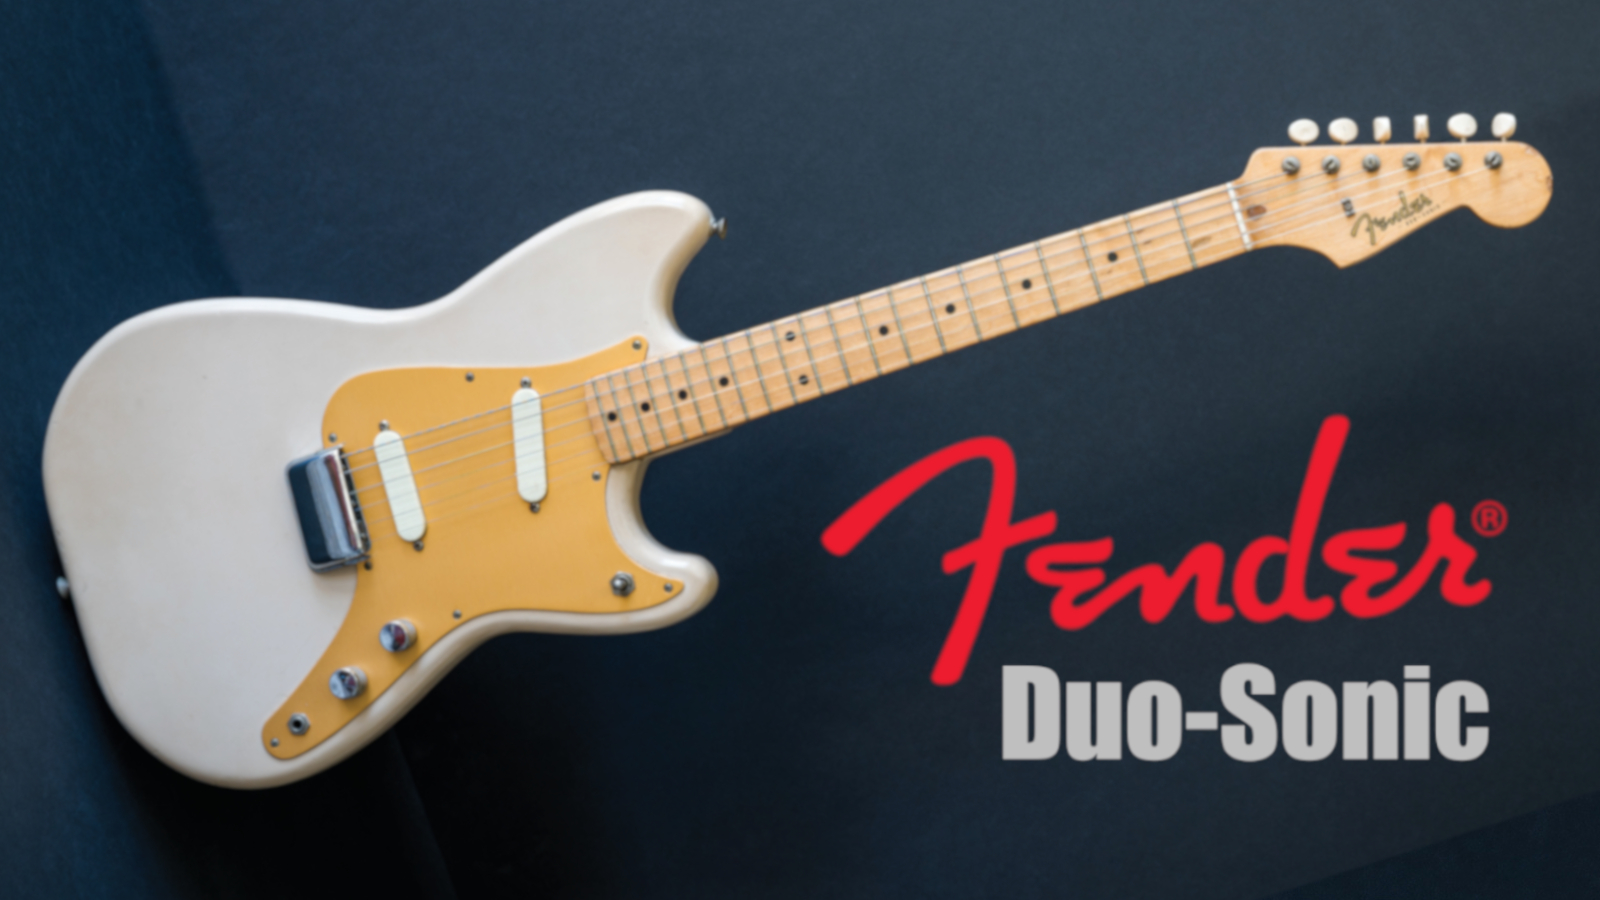 The History of the Fender Duo-Sonic | GuitarPlayer